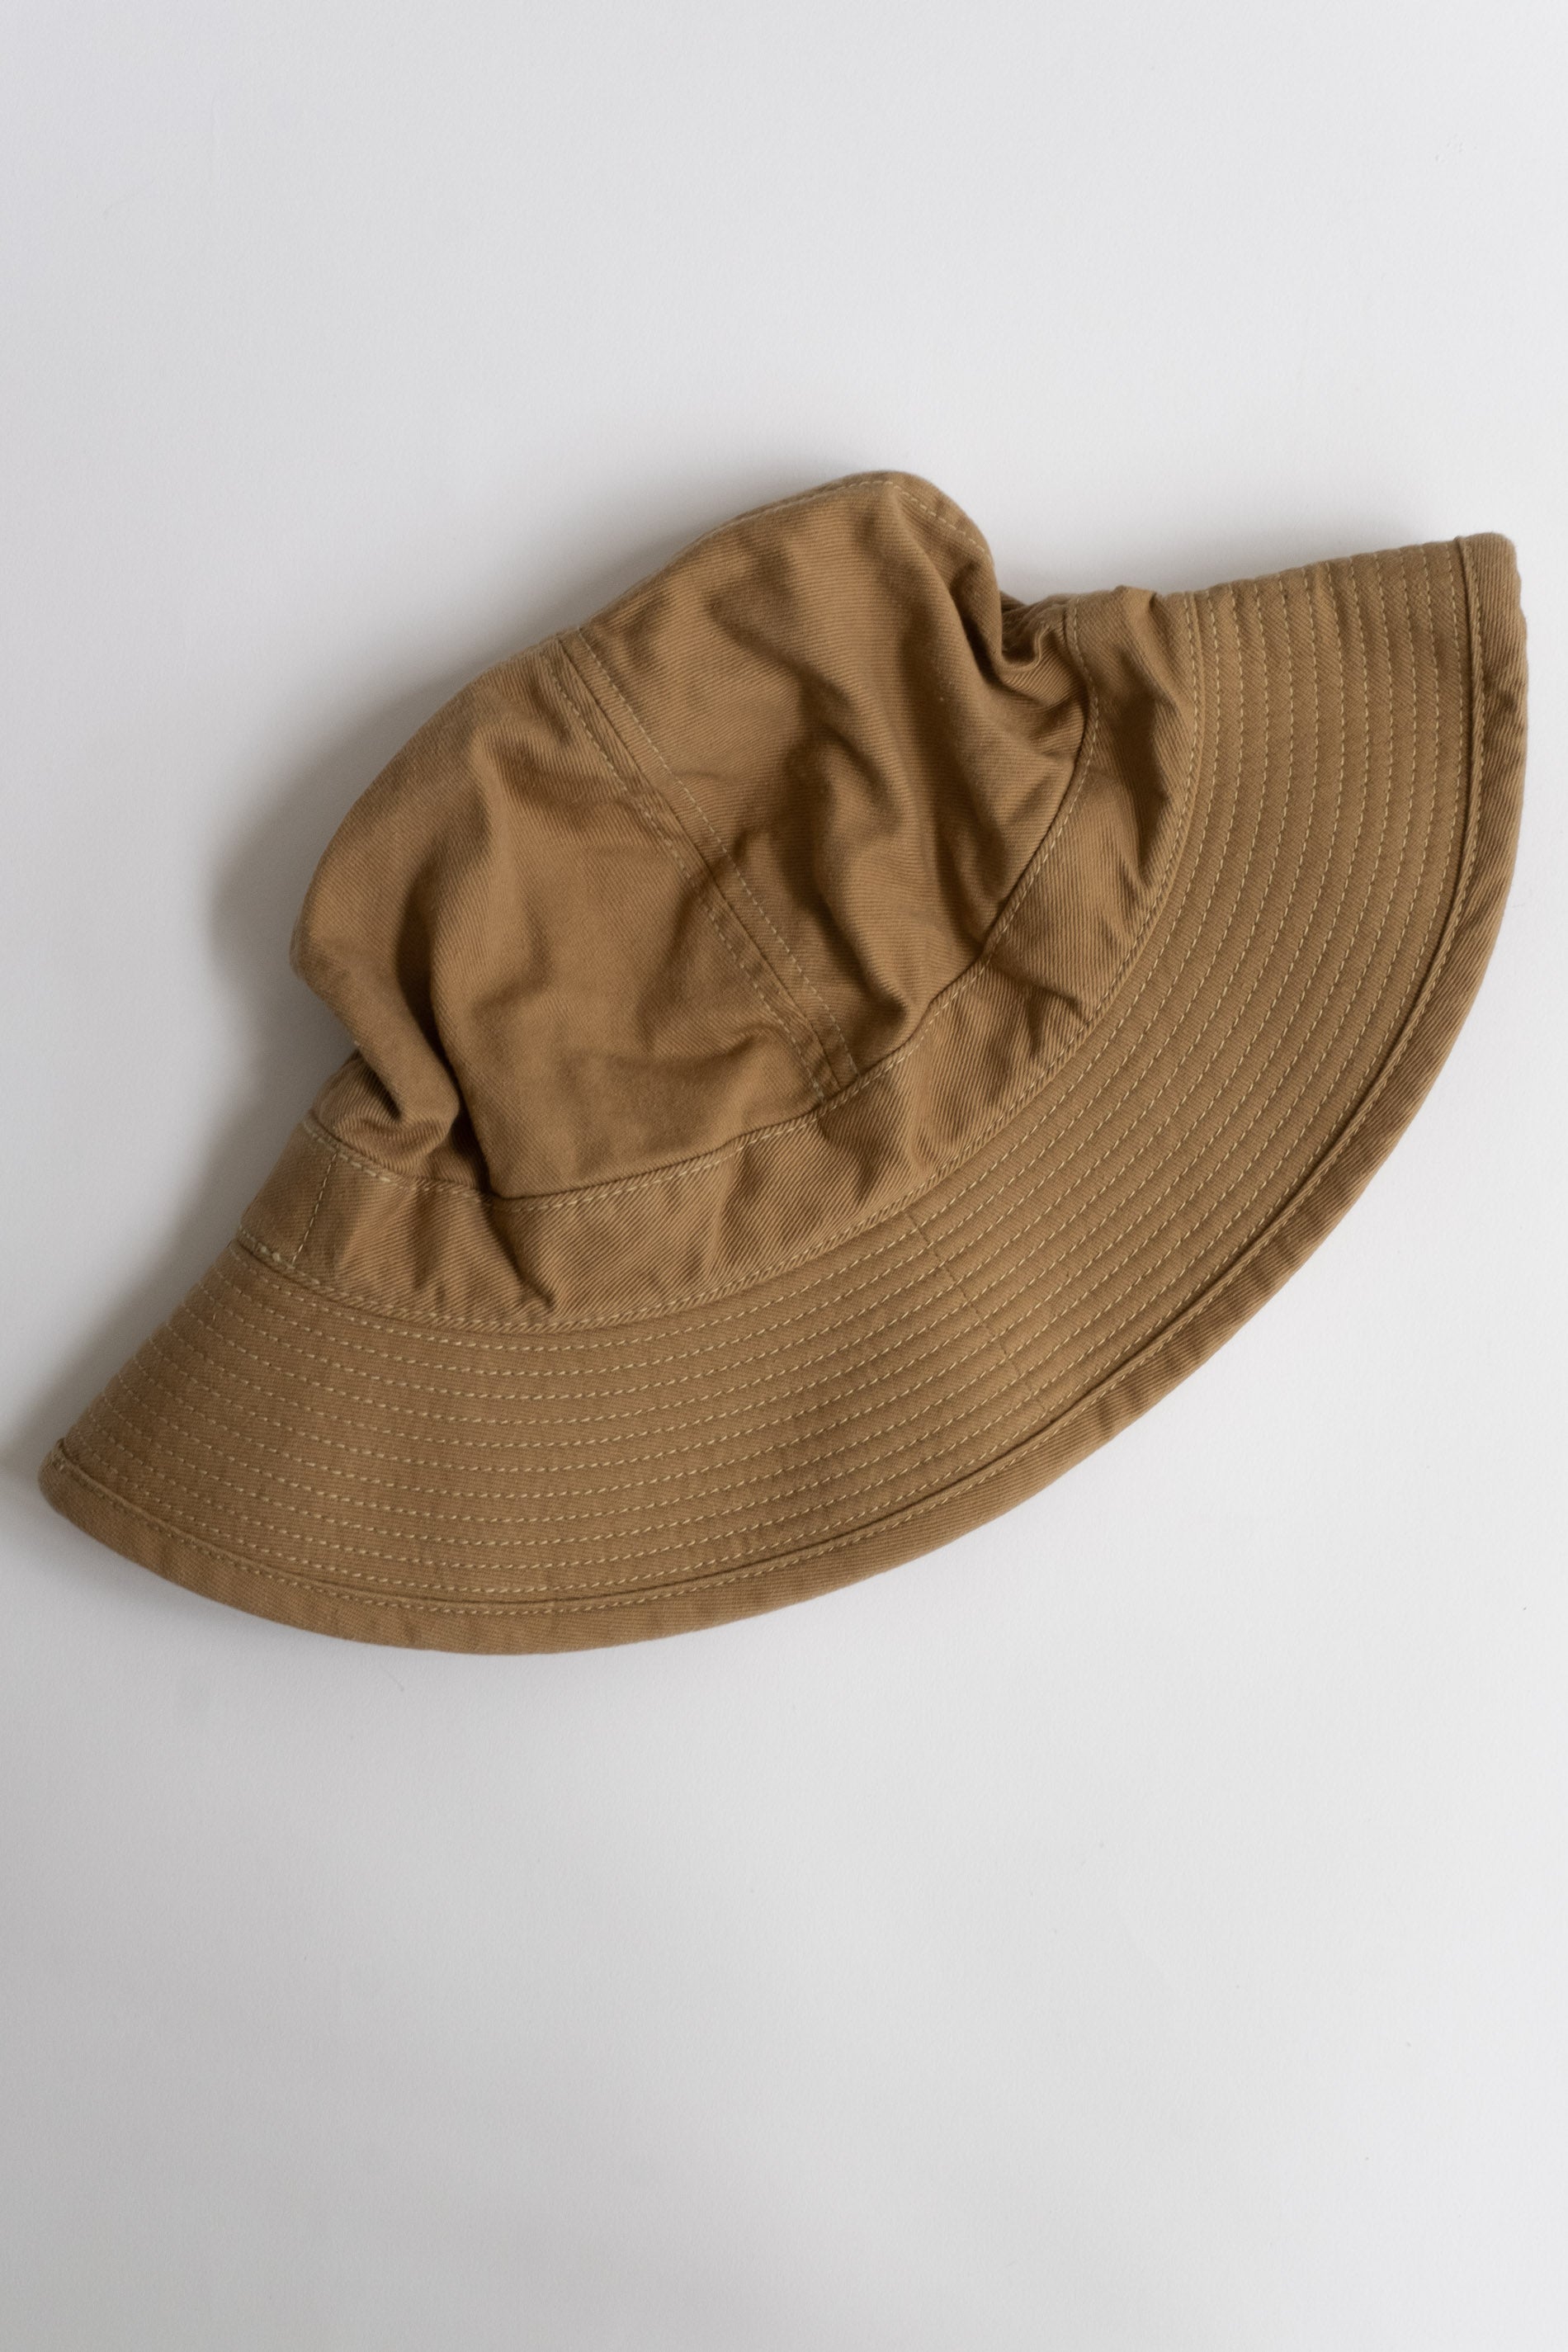 orSlow | US NAVY CHINO HAT IN KHAKI – RELIQUARY